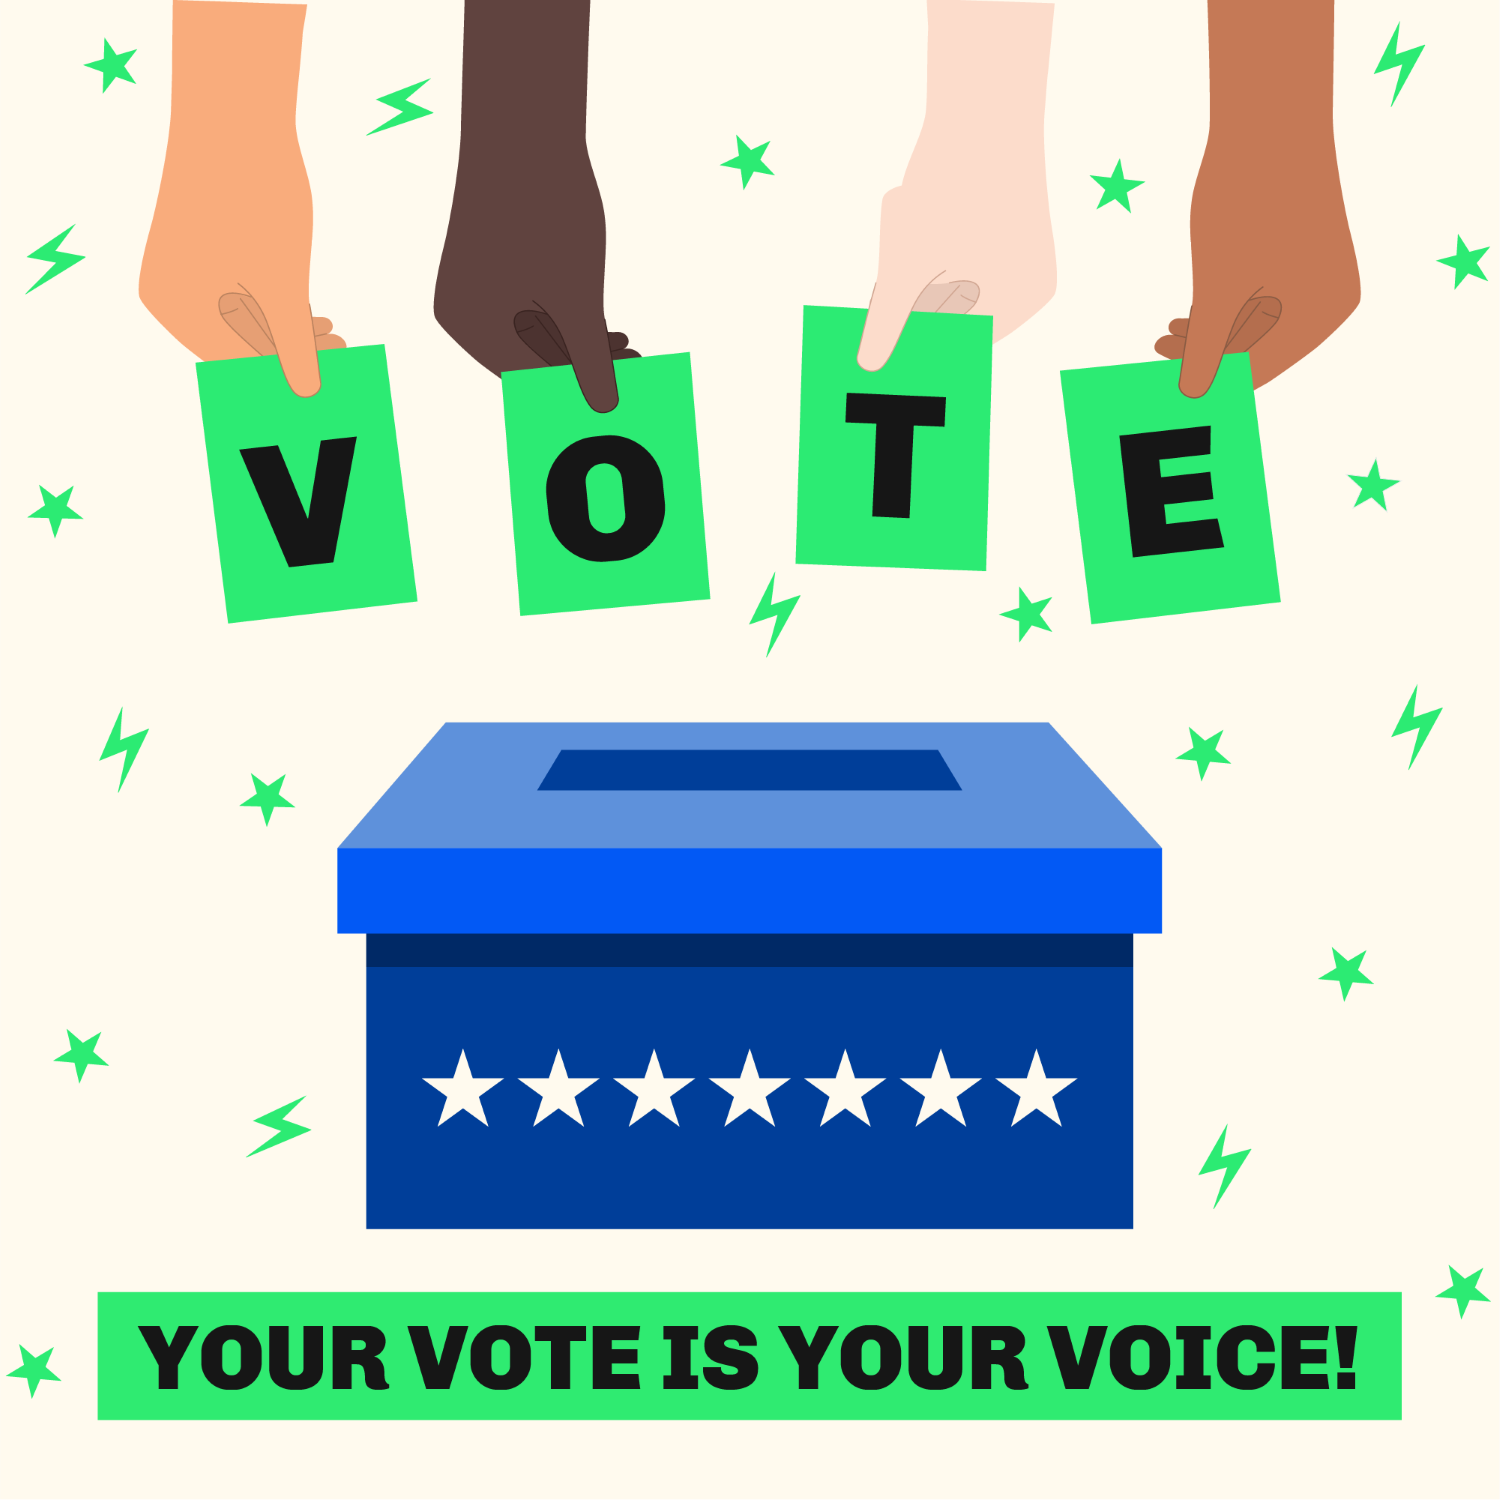 Your vote is your voice!